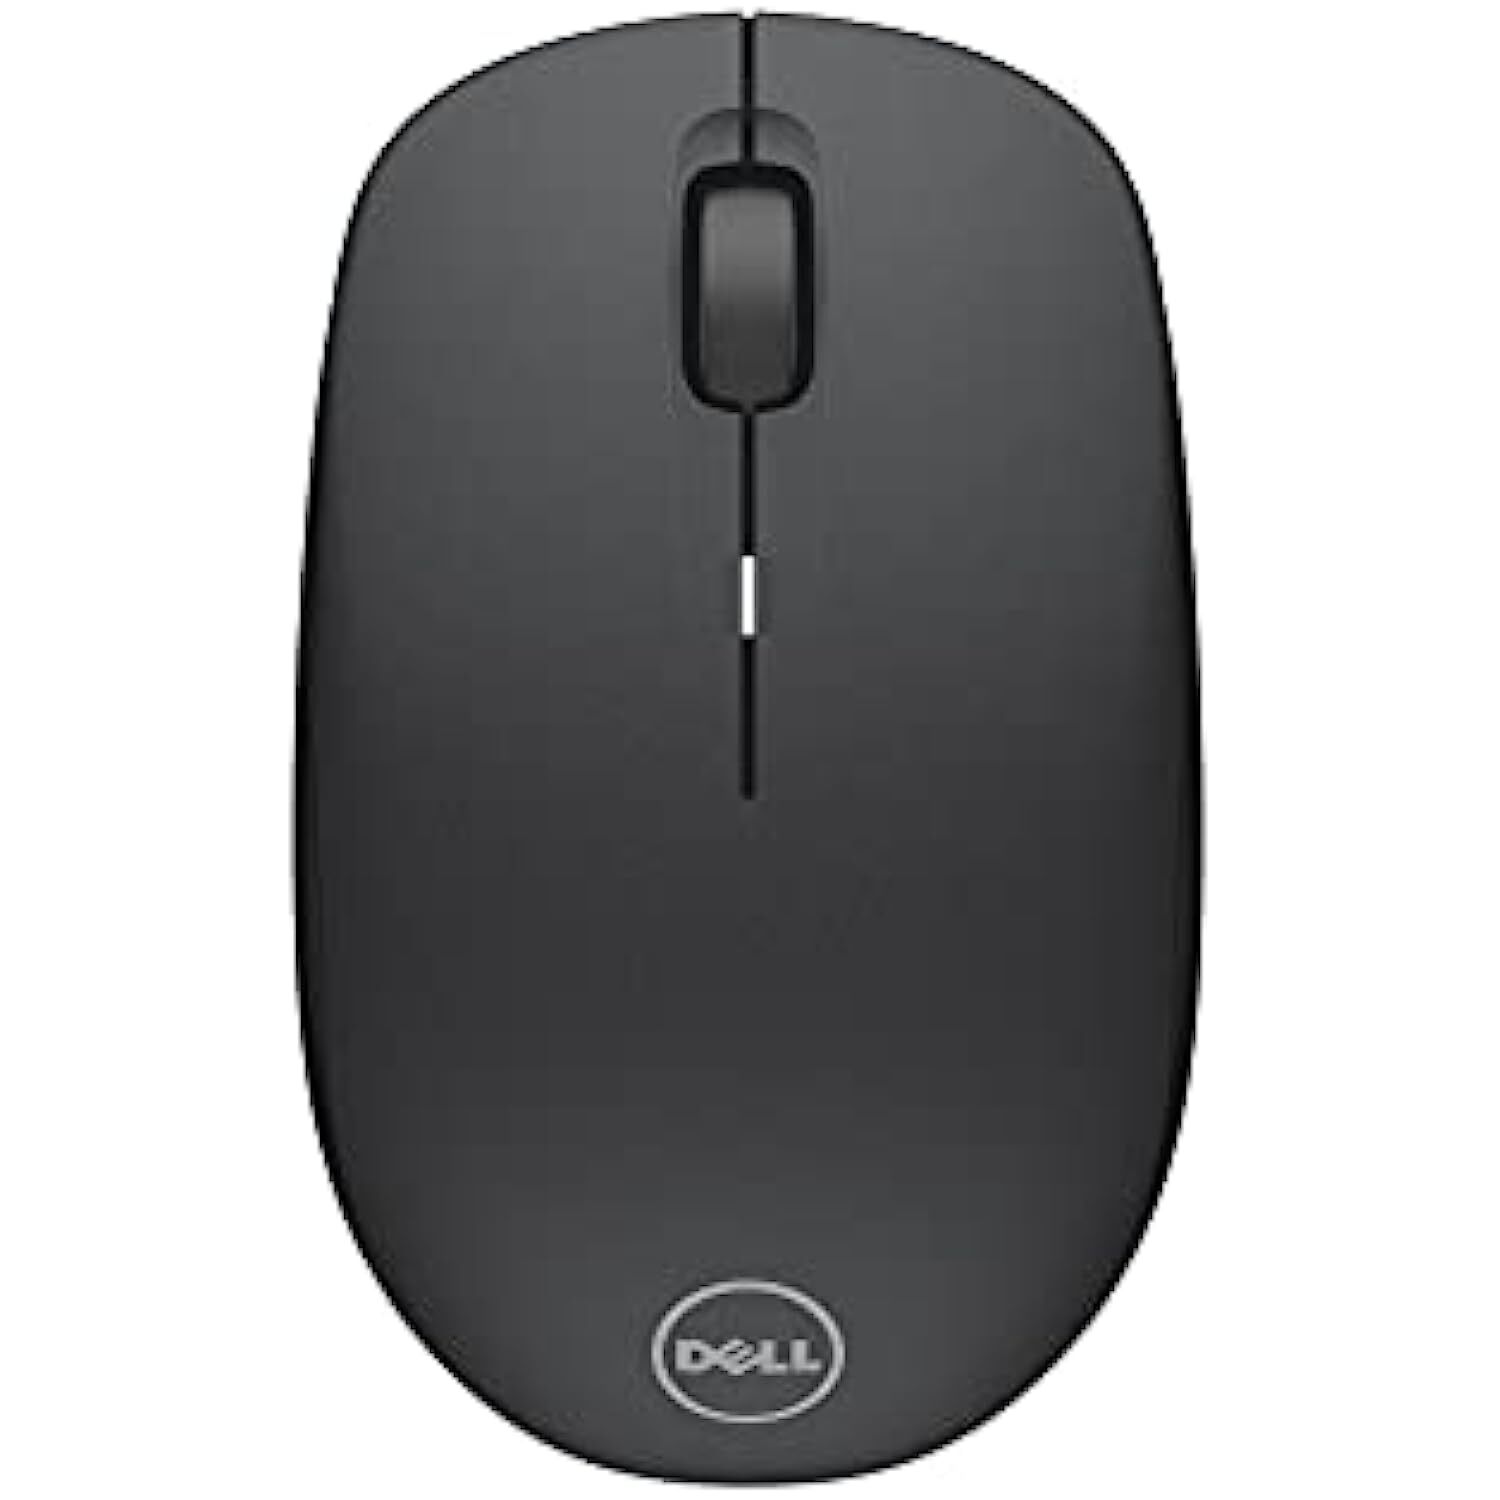 Dell Wm126-Black Wireless Mouse | Compact & Travel Friendly Design | Ambidextrous |Universal Pairing Technology: Connect Up To 6 Compatible Devices With One Receiver